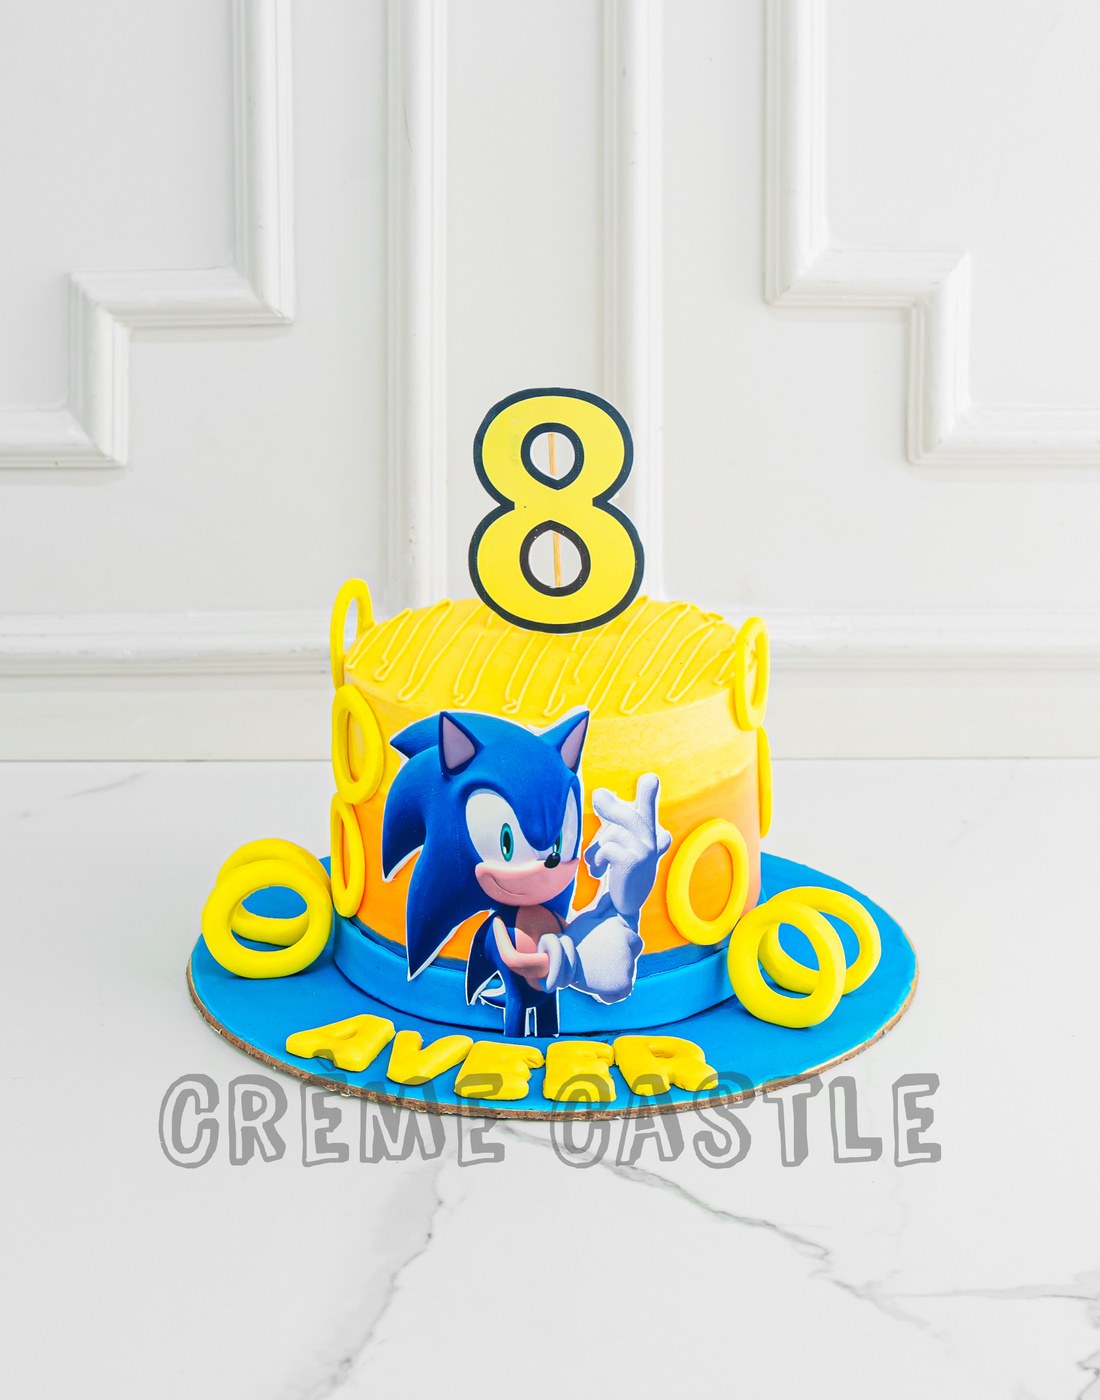 Sonic the Hedgehog Knuckles and Tails Edible Cake Topper Image ABPID56252-  1/4 Sheet - Walmart.com